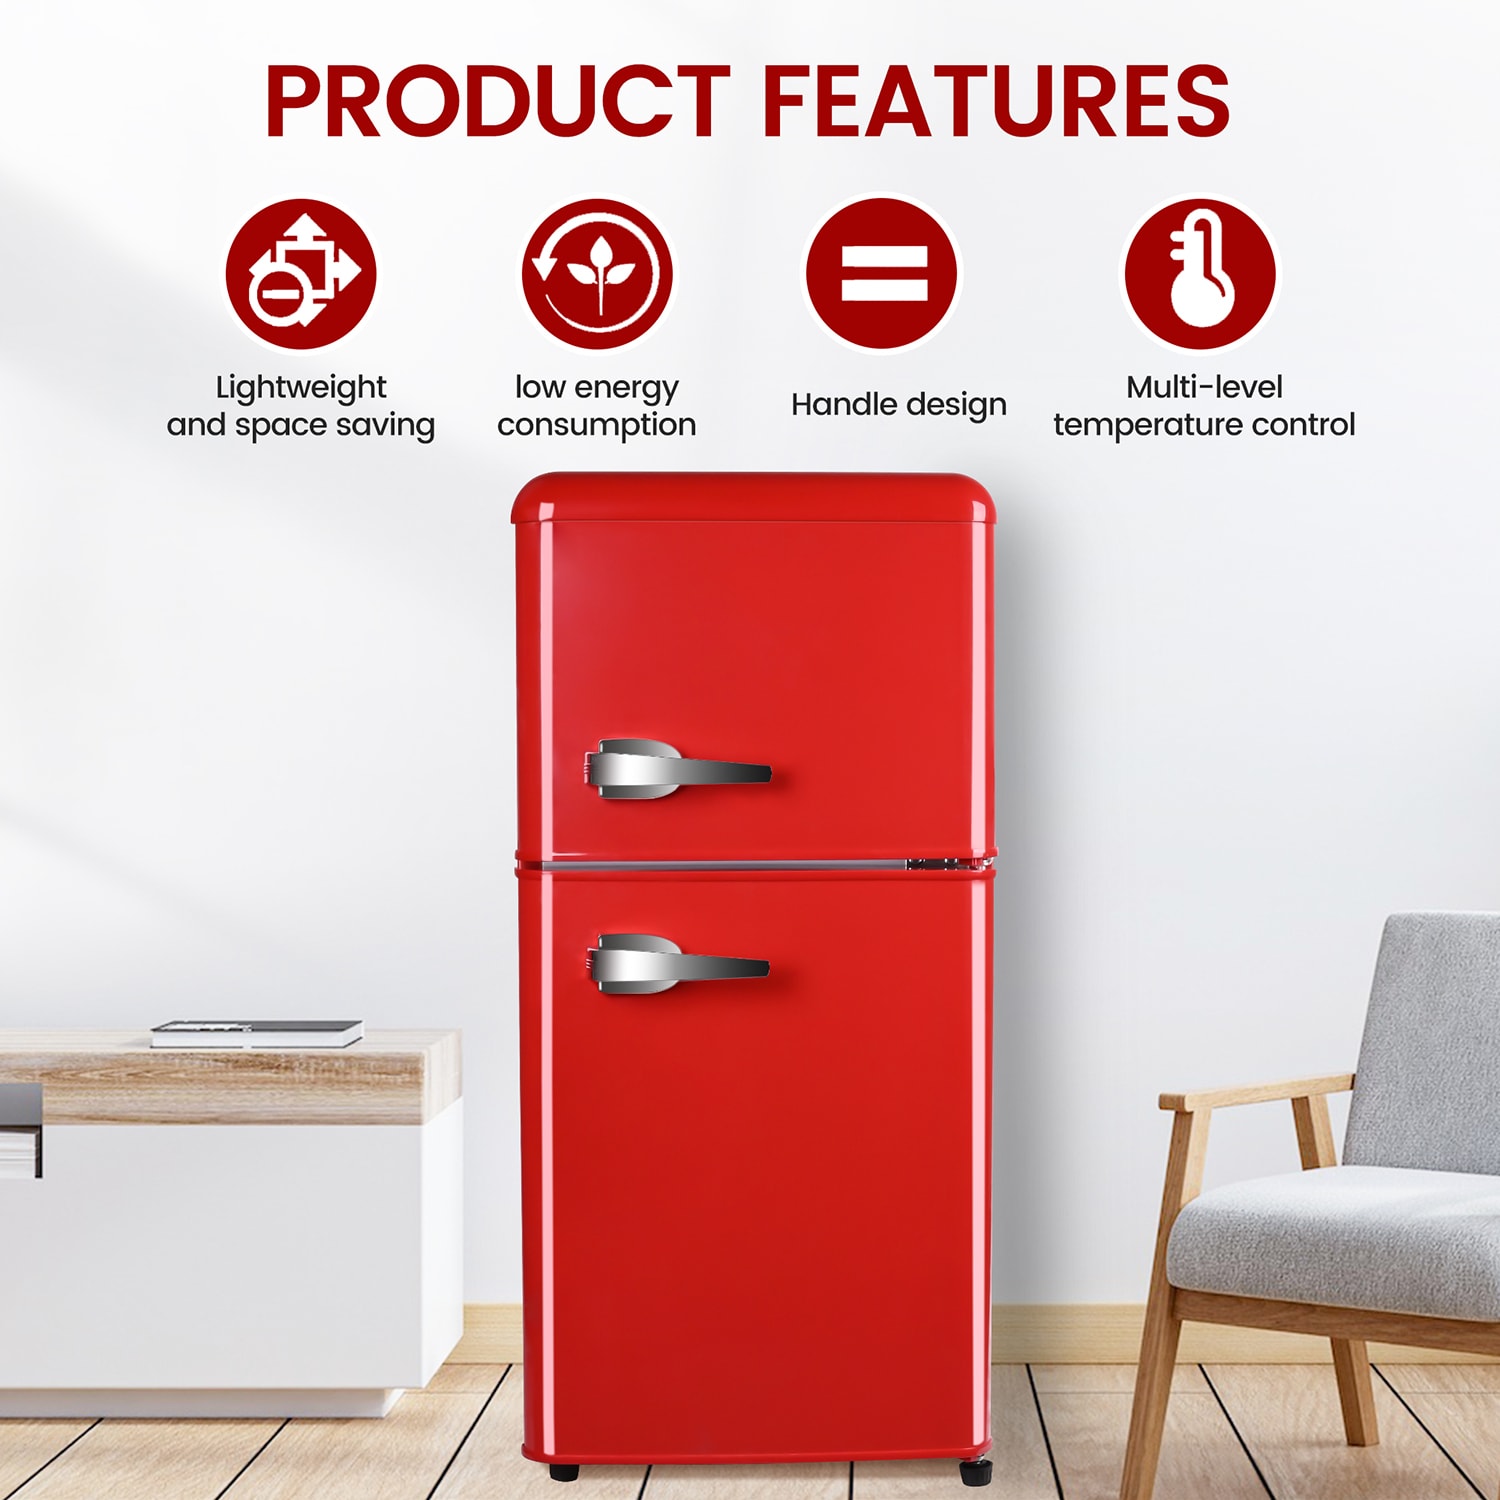 🔴Revive Your Space with this Retro Red Mini Fridge - Compact